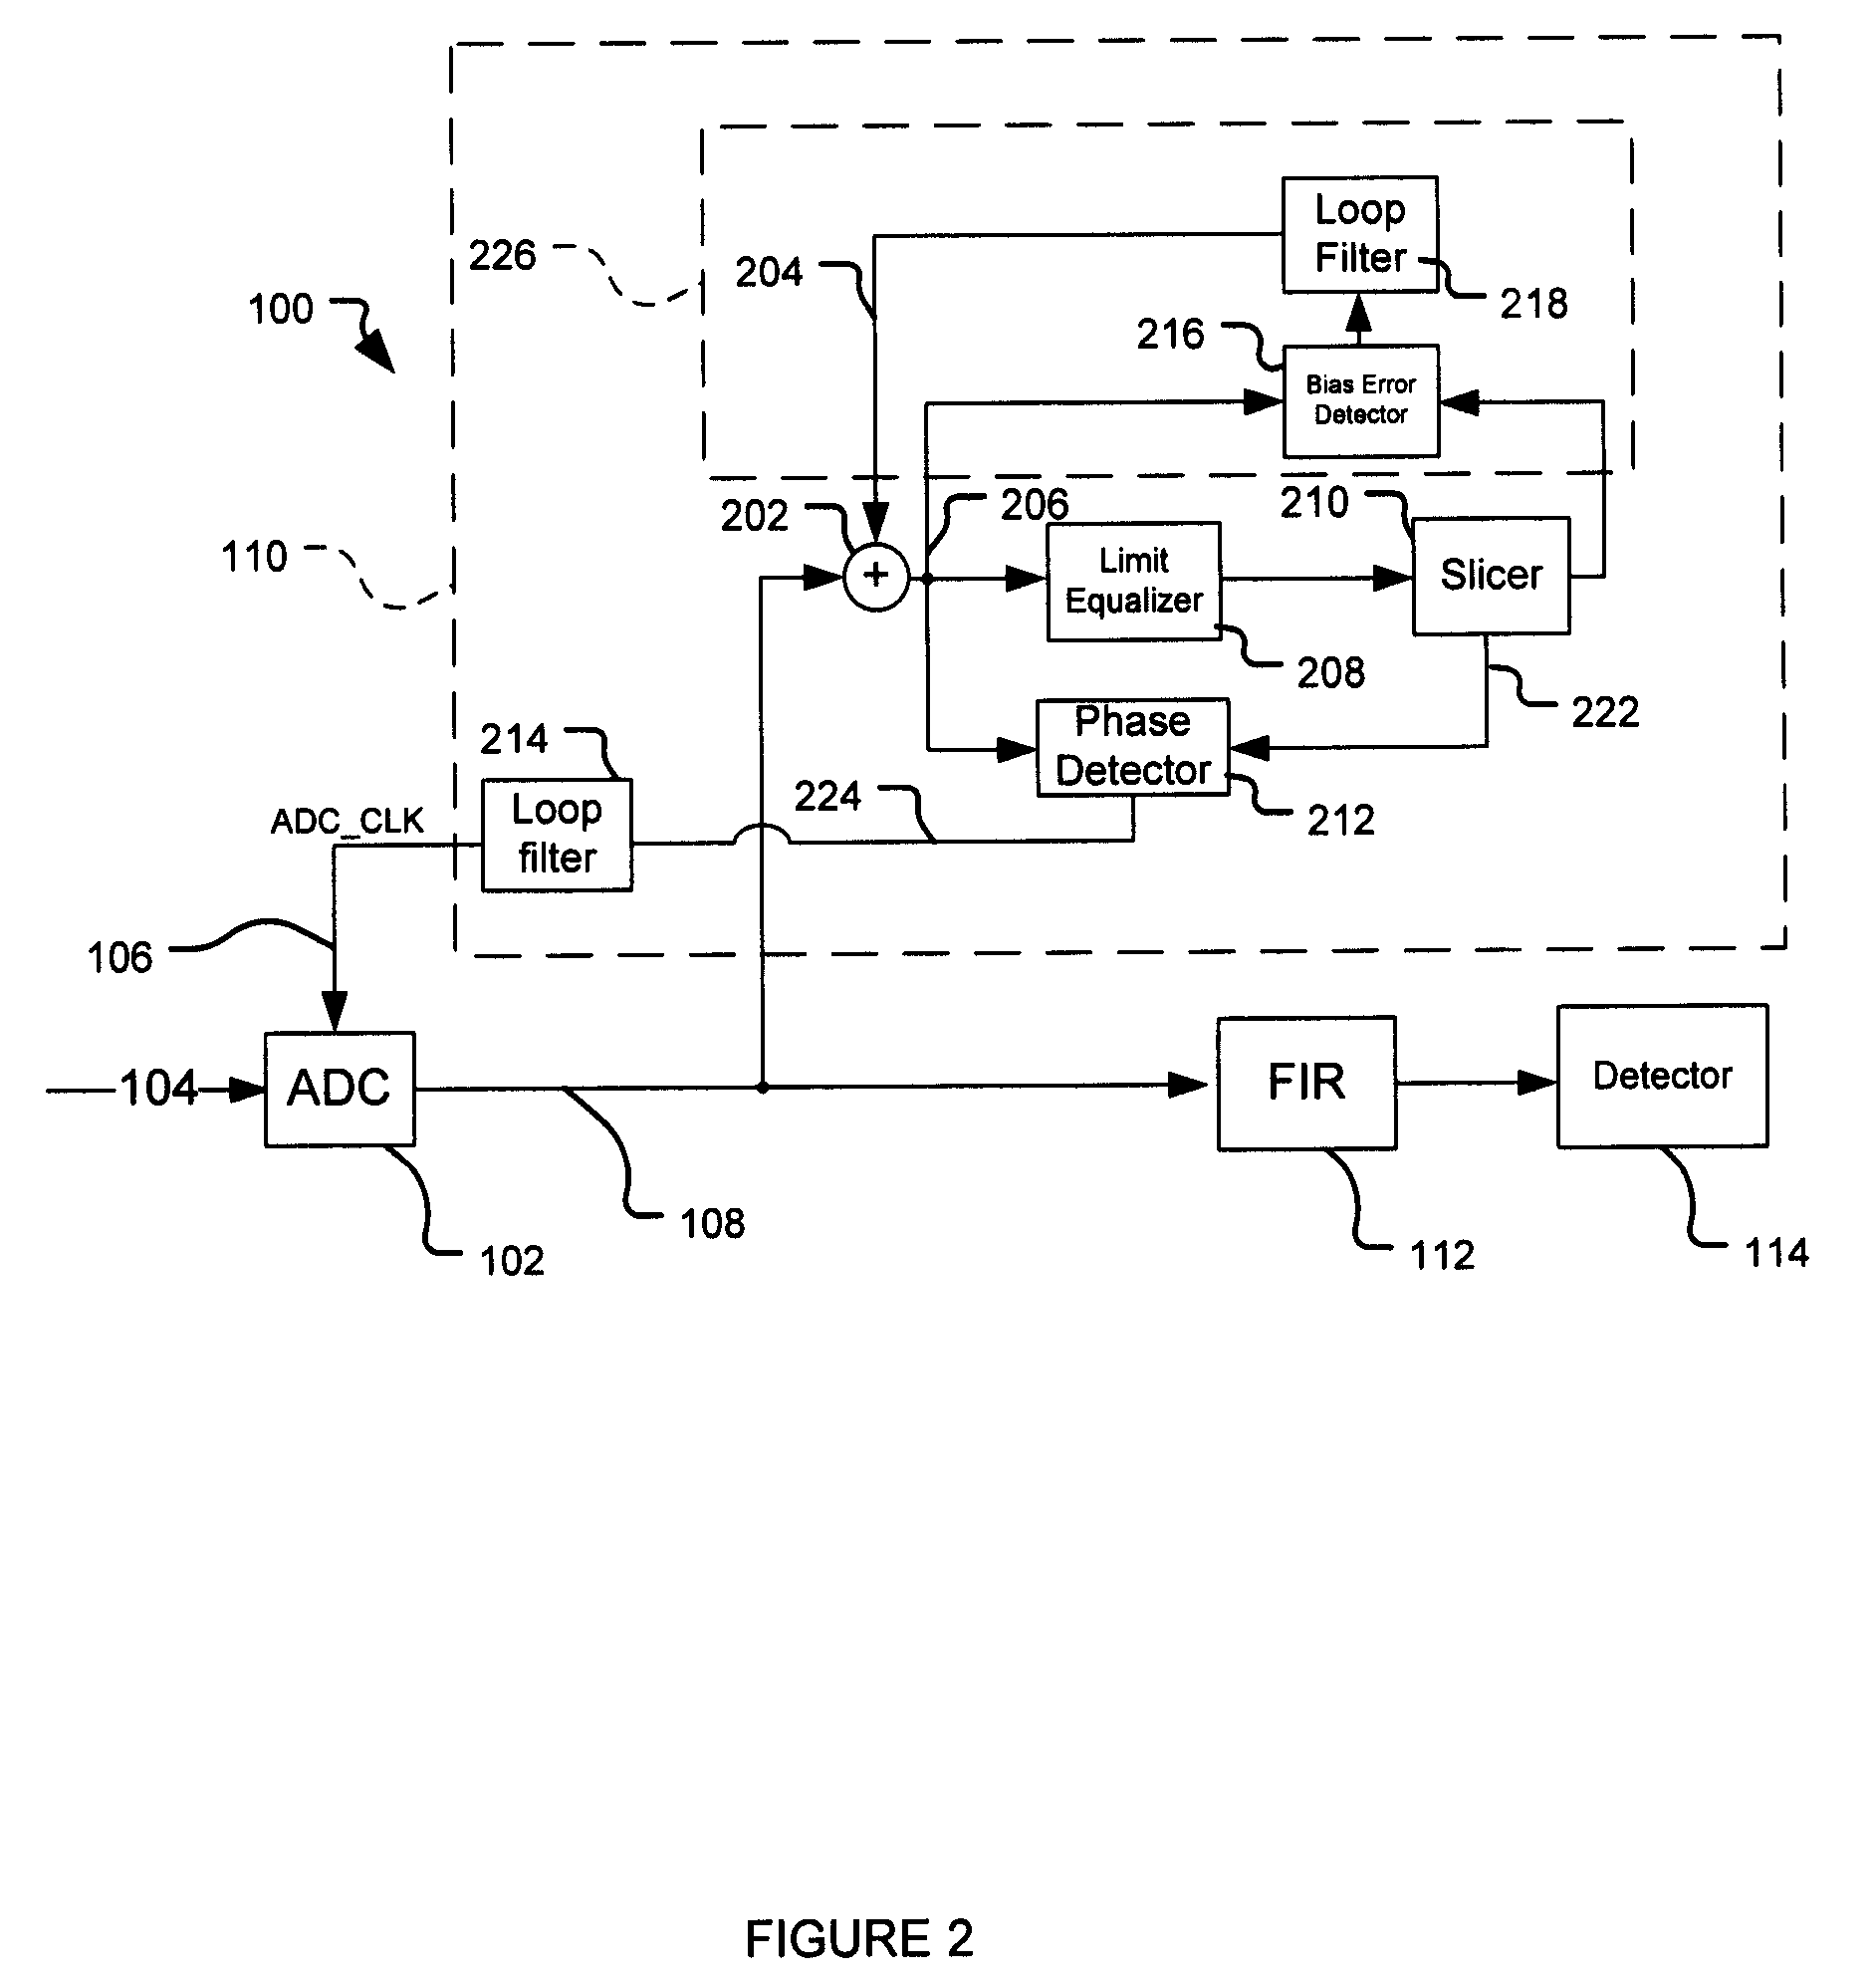 Timing loop based on analog to digital converter output and method of use